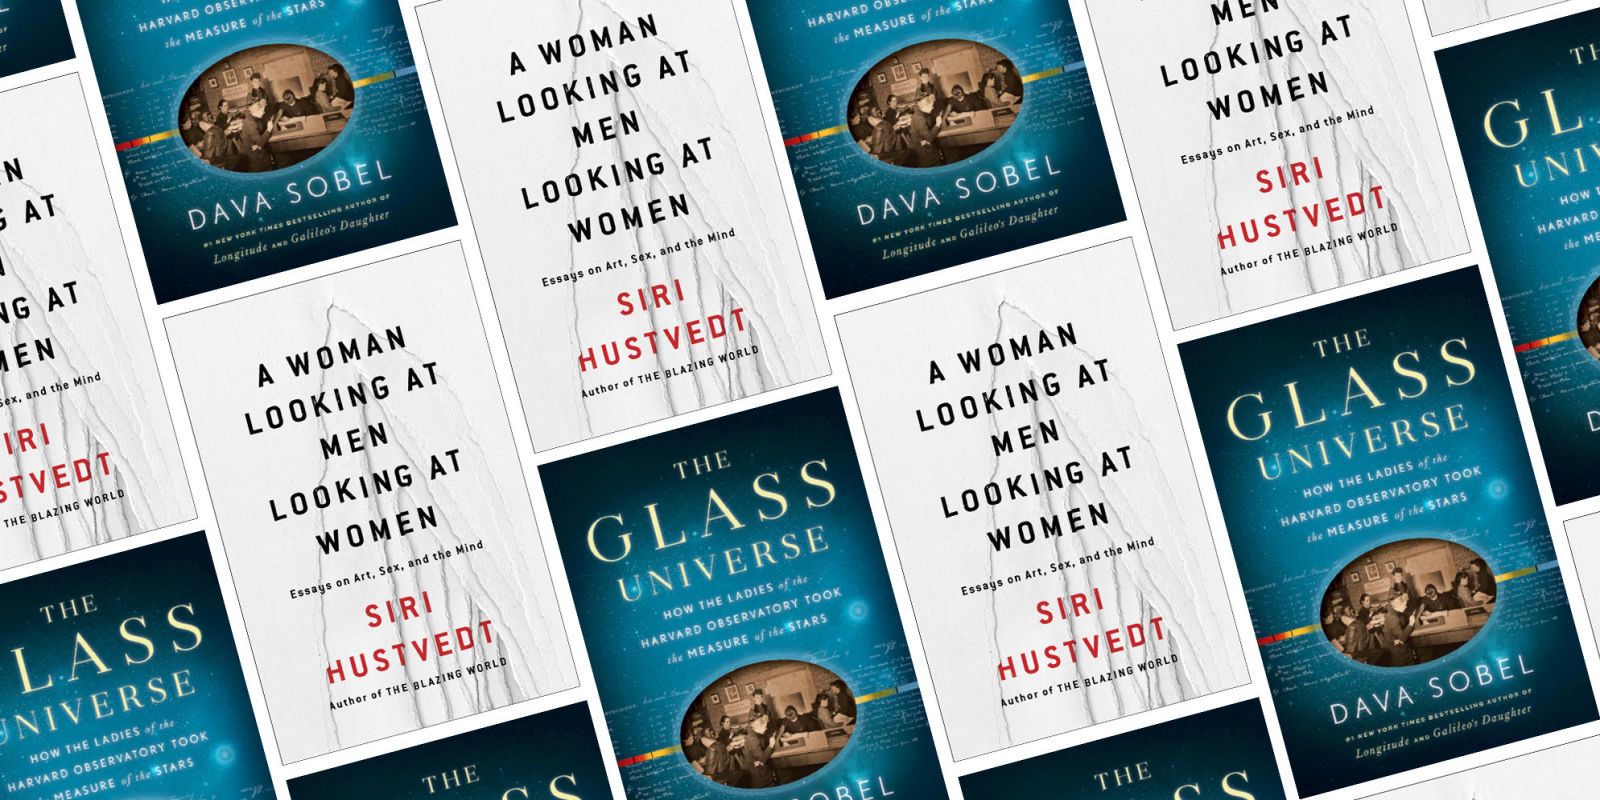 Dava Sobel and Siri Hustvedts New Books Explore Womens Impact on Art and Science image image image